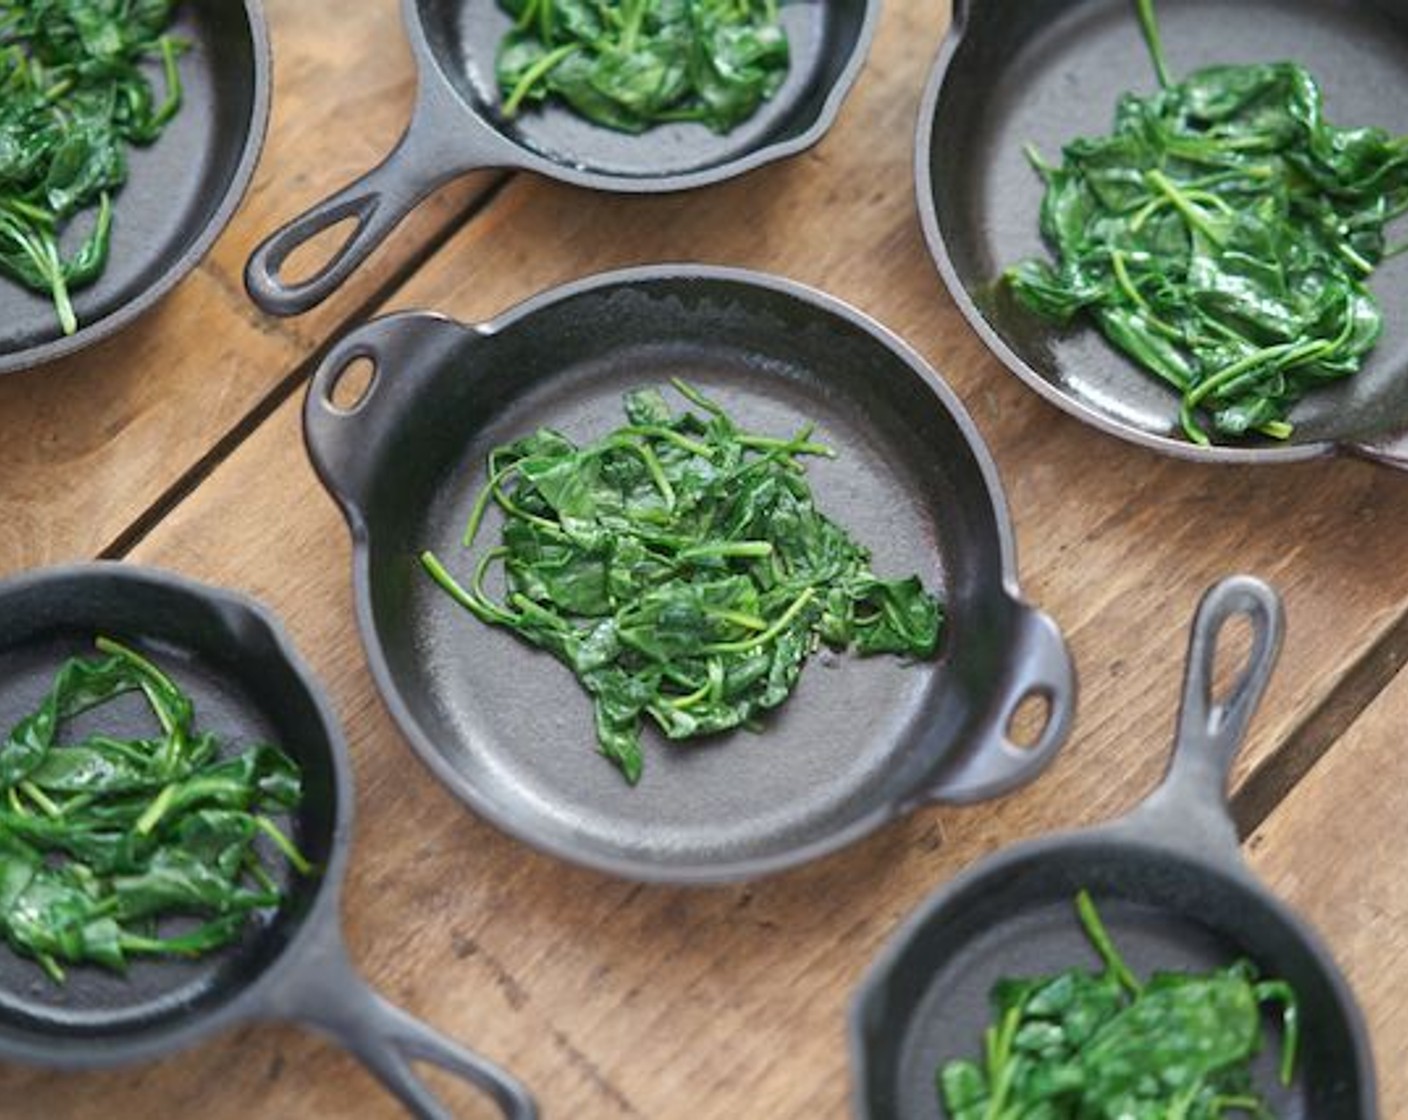 step 4 In a skillet over medium heat, melt Butter (1/2 Tbsp). Sauté Fresh Baby Spinach (5 2/3 cups) until just wilted. Distribute evenly among oven-safe cooking/serving dishes.